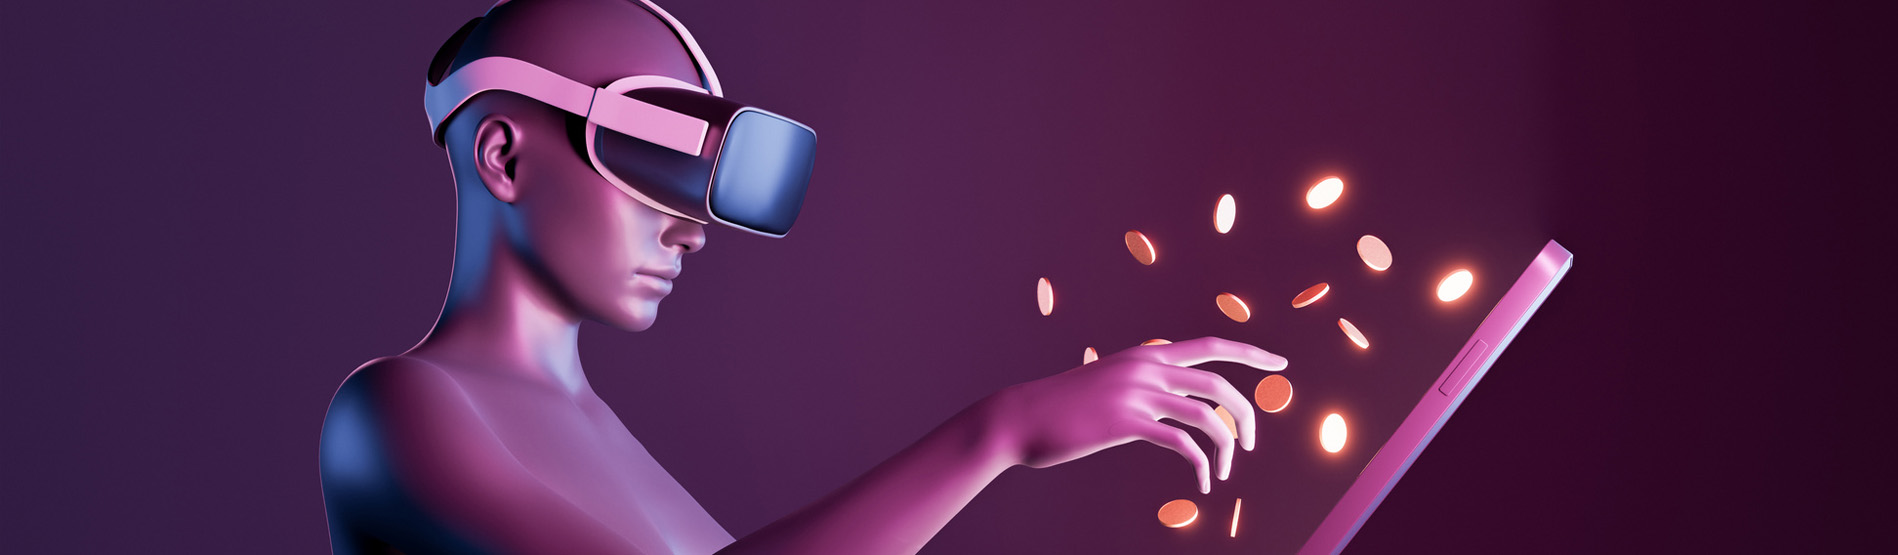 The Digital Future for Business & Society: Emerging Perspectives on the Metaverse 